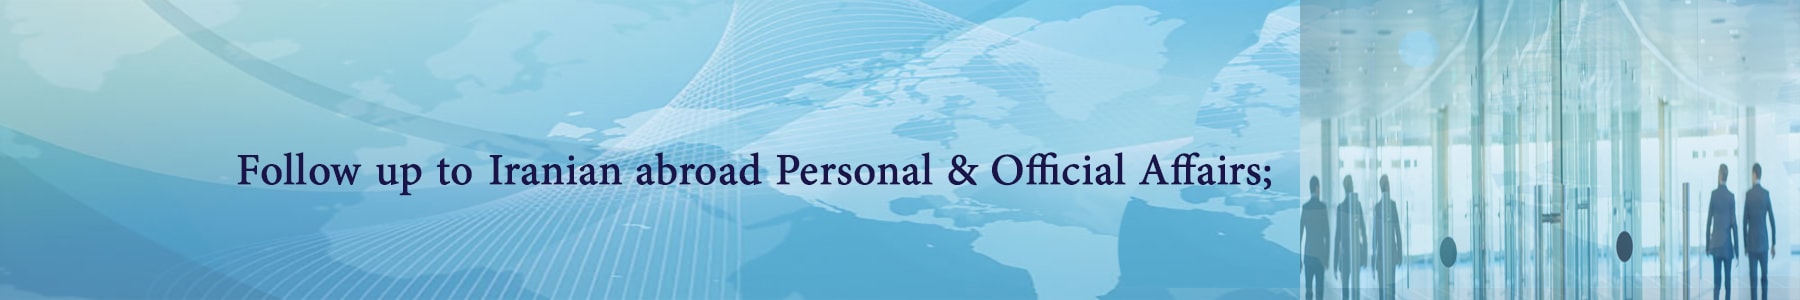 Iranian-abroad-personal-affairs-consultation-services